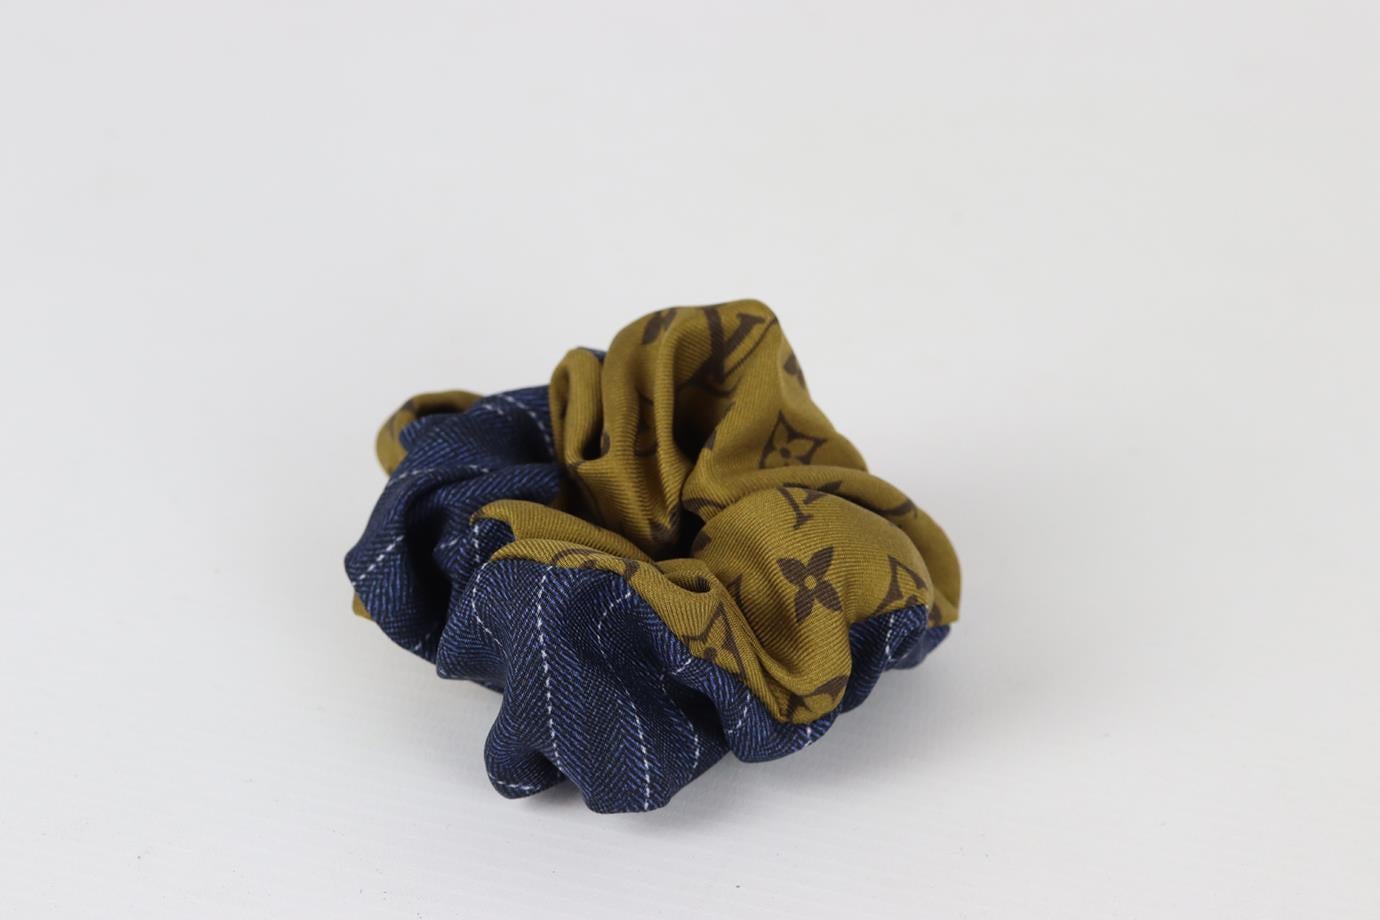 Louis vuitton monogrammed silk hair scrunchie. Brown, tan and navy. Does not come with dustbag or box. Height: 5.1 in. Width: 5.1 in. New without tags